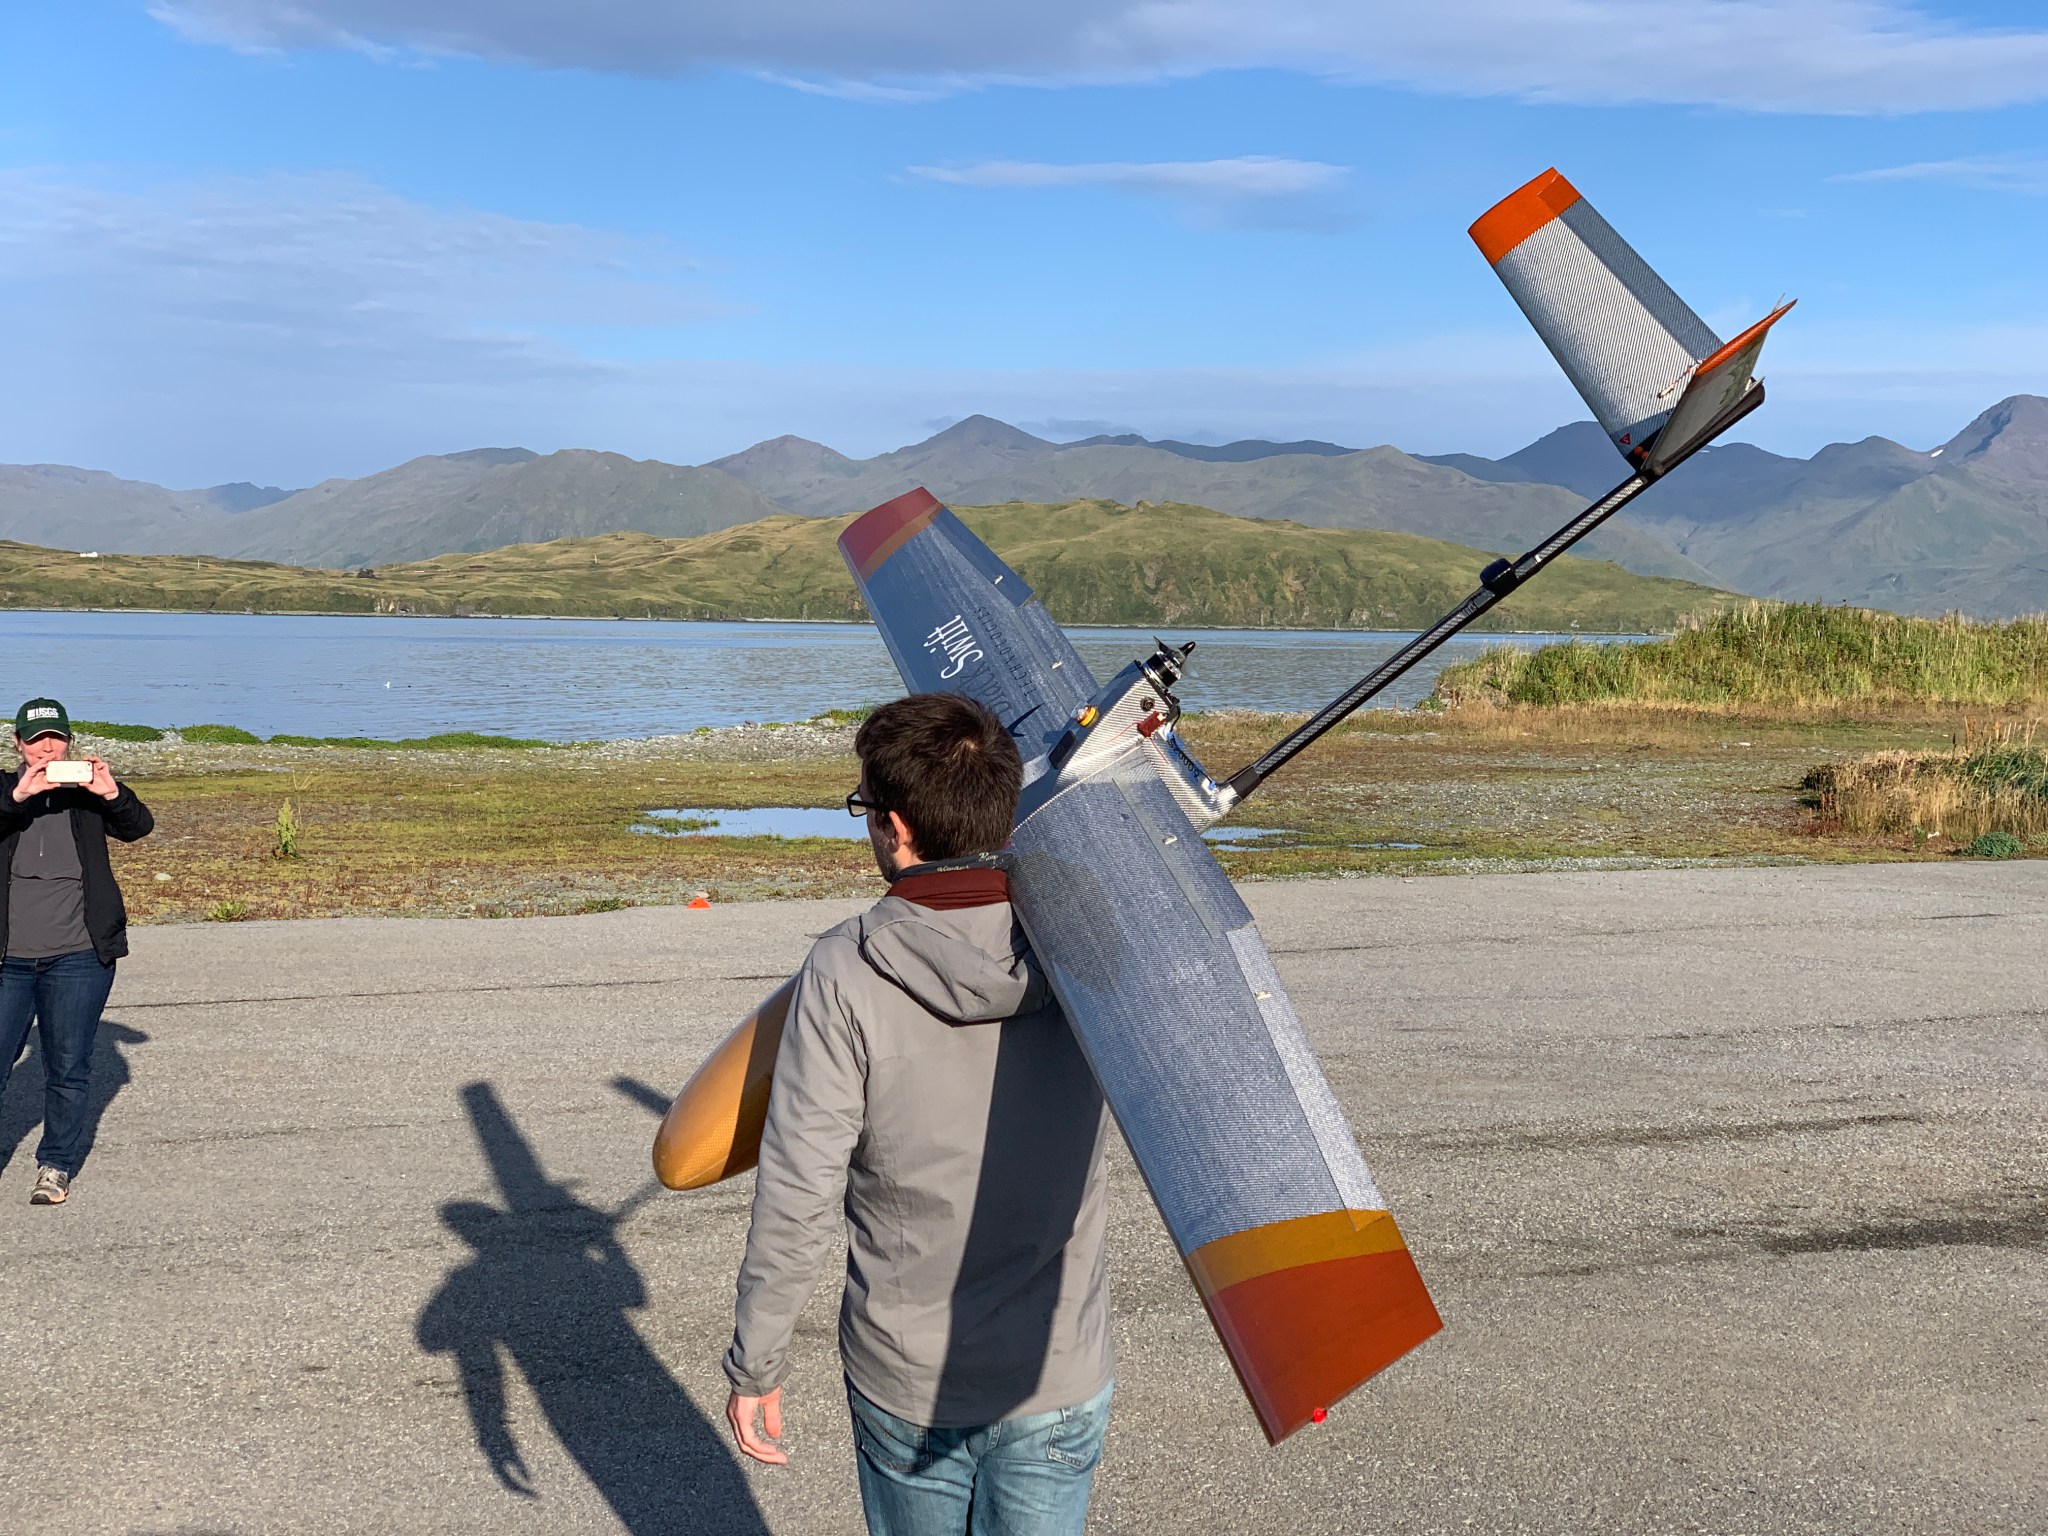 A person carrying a fixed-wing unpiloted aircraft, or drone, over his shoulder